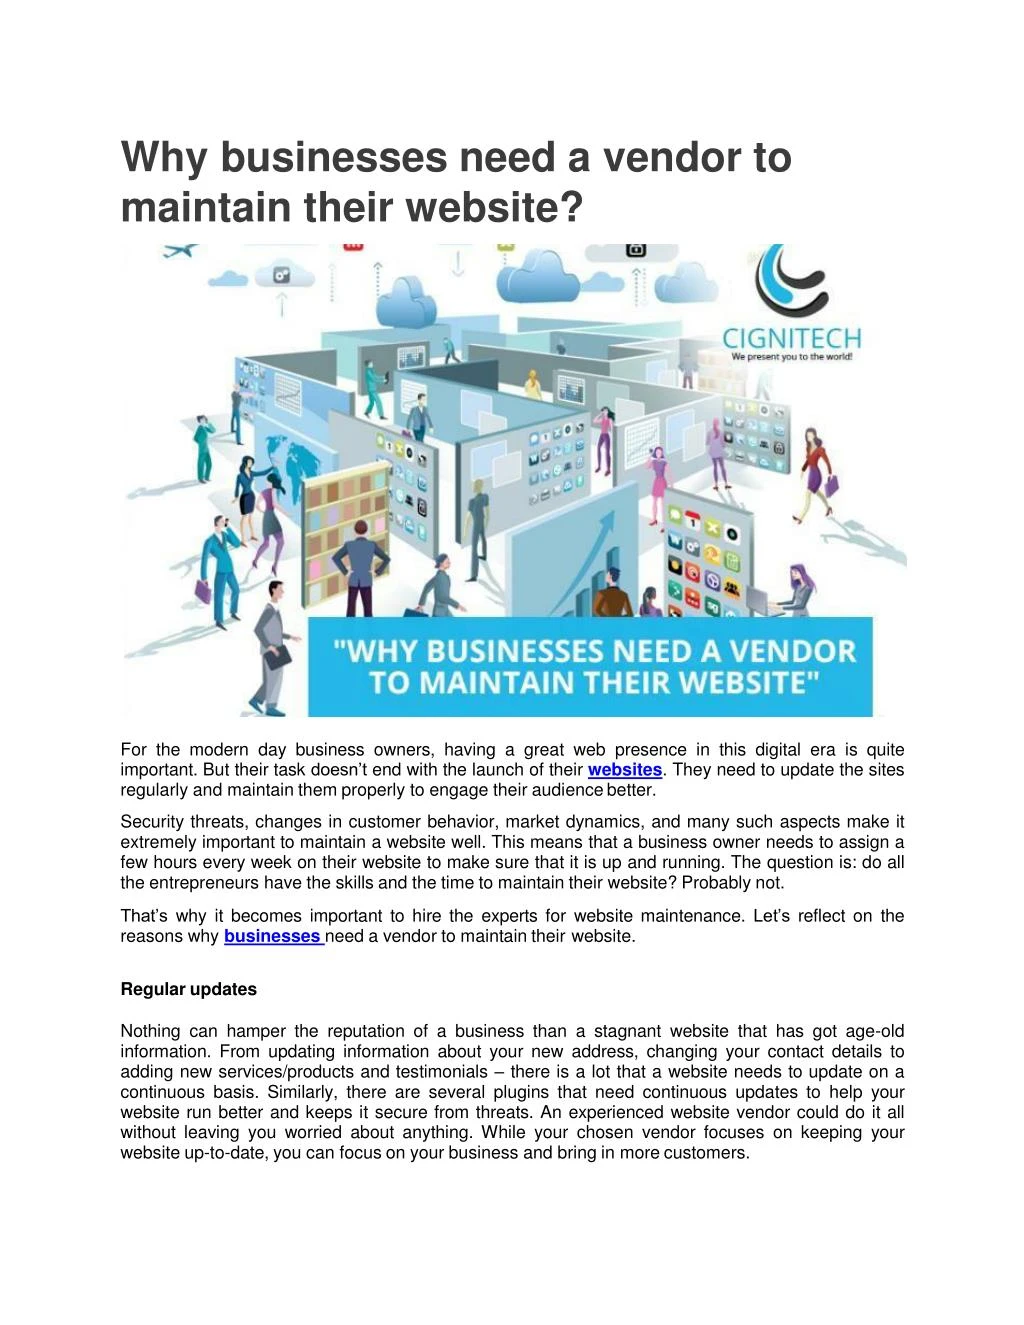 why businesses need a vendor to maintain their website